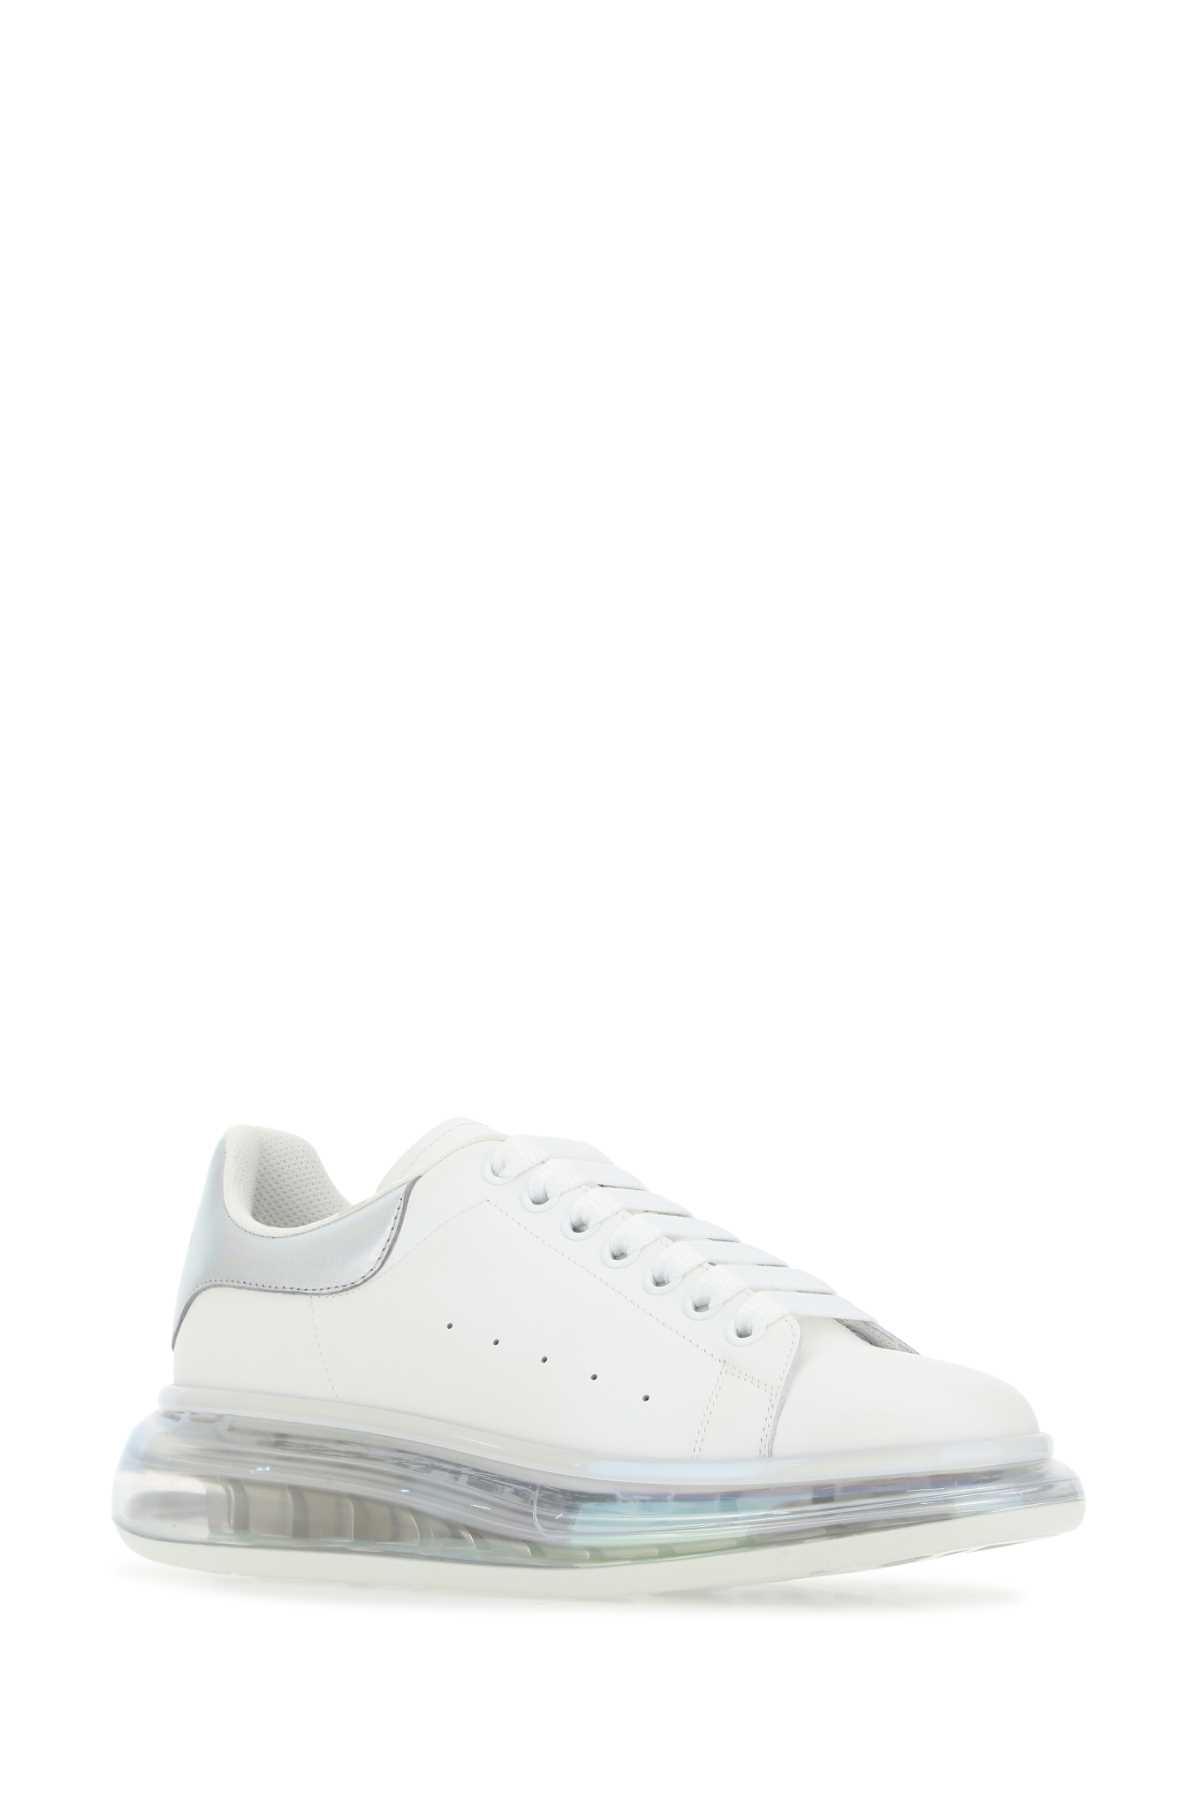 Alexander Mcqueen White Leather Sneakers With Silver Leather Heel